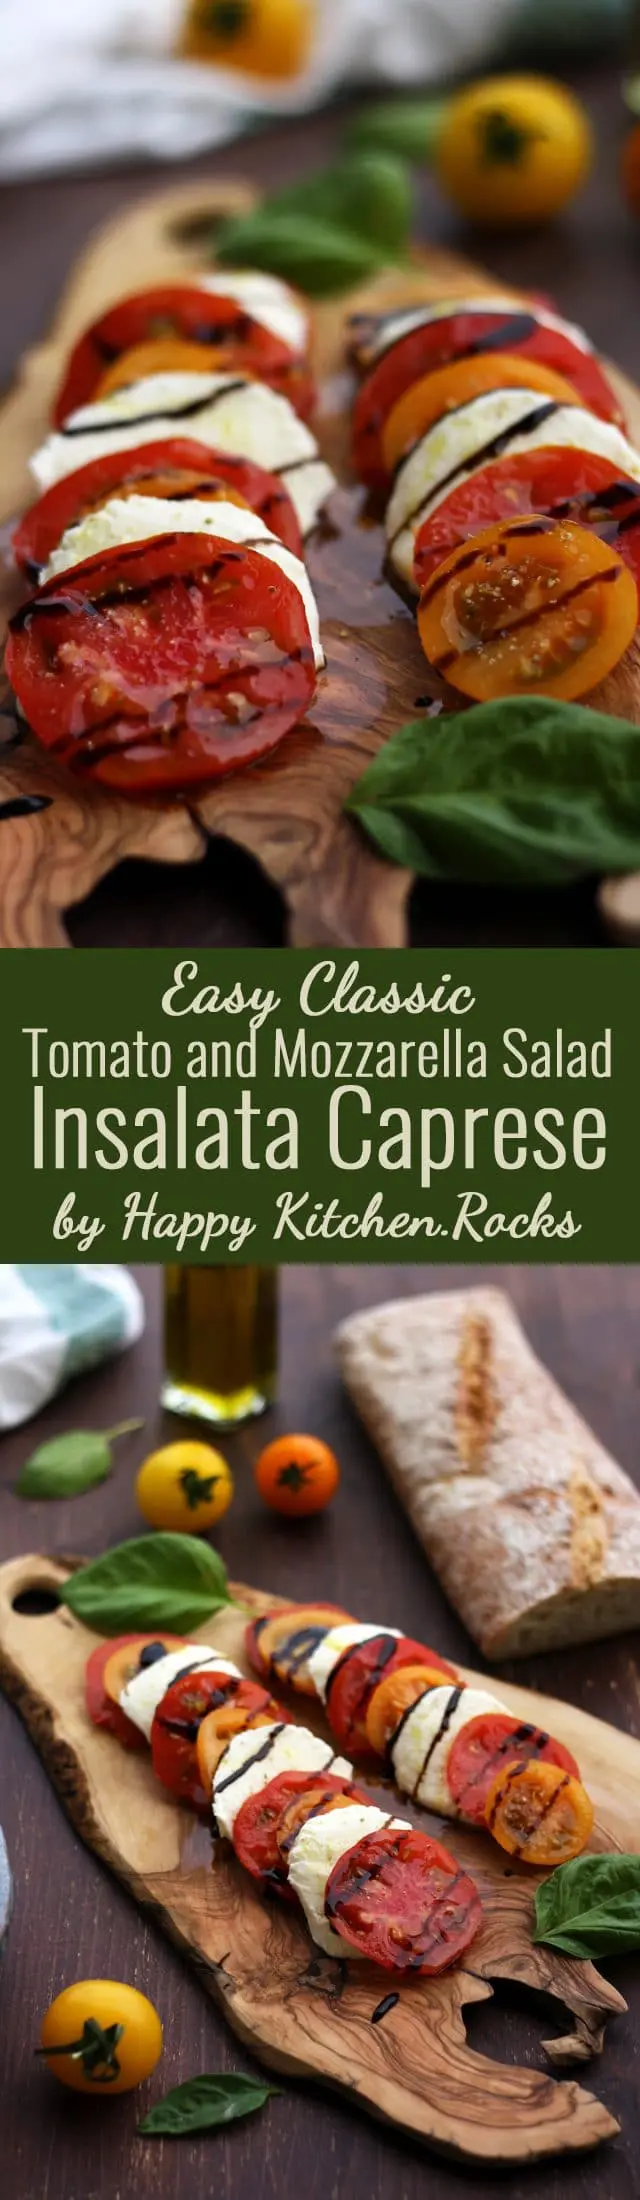 Classic Insalata Caprese (Tomato Mozzarella Salad) is the perfect quick appetizer or salad packed with summer flavors! Light, refreshing and so easy to make! A great way to enjoy in-season tomatoes at the fullest. #saladrecipes #recipe #summerveggies #healthyrecipes #Mediterraneanfood #salad #summersalad #tomatoes #caprese #tomatorecipe #mozzarella #tomatosalad #saladrecipe #summerrecipe